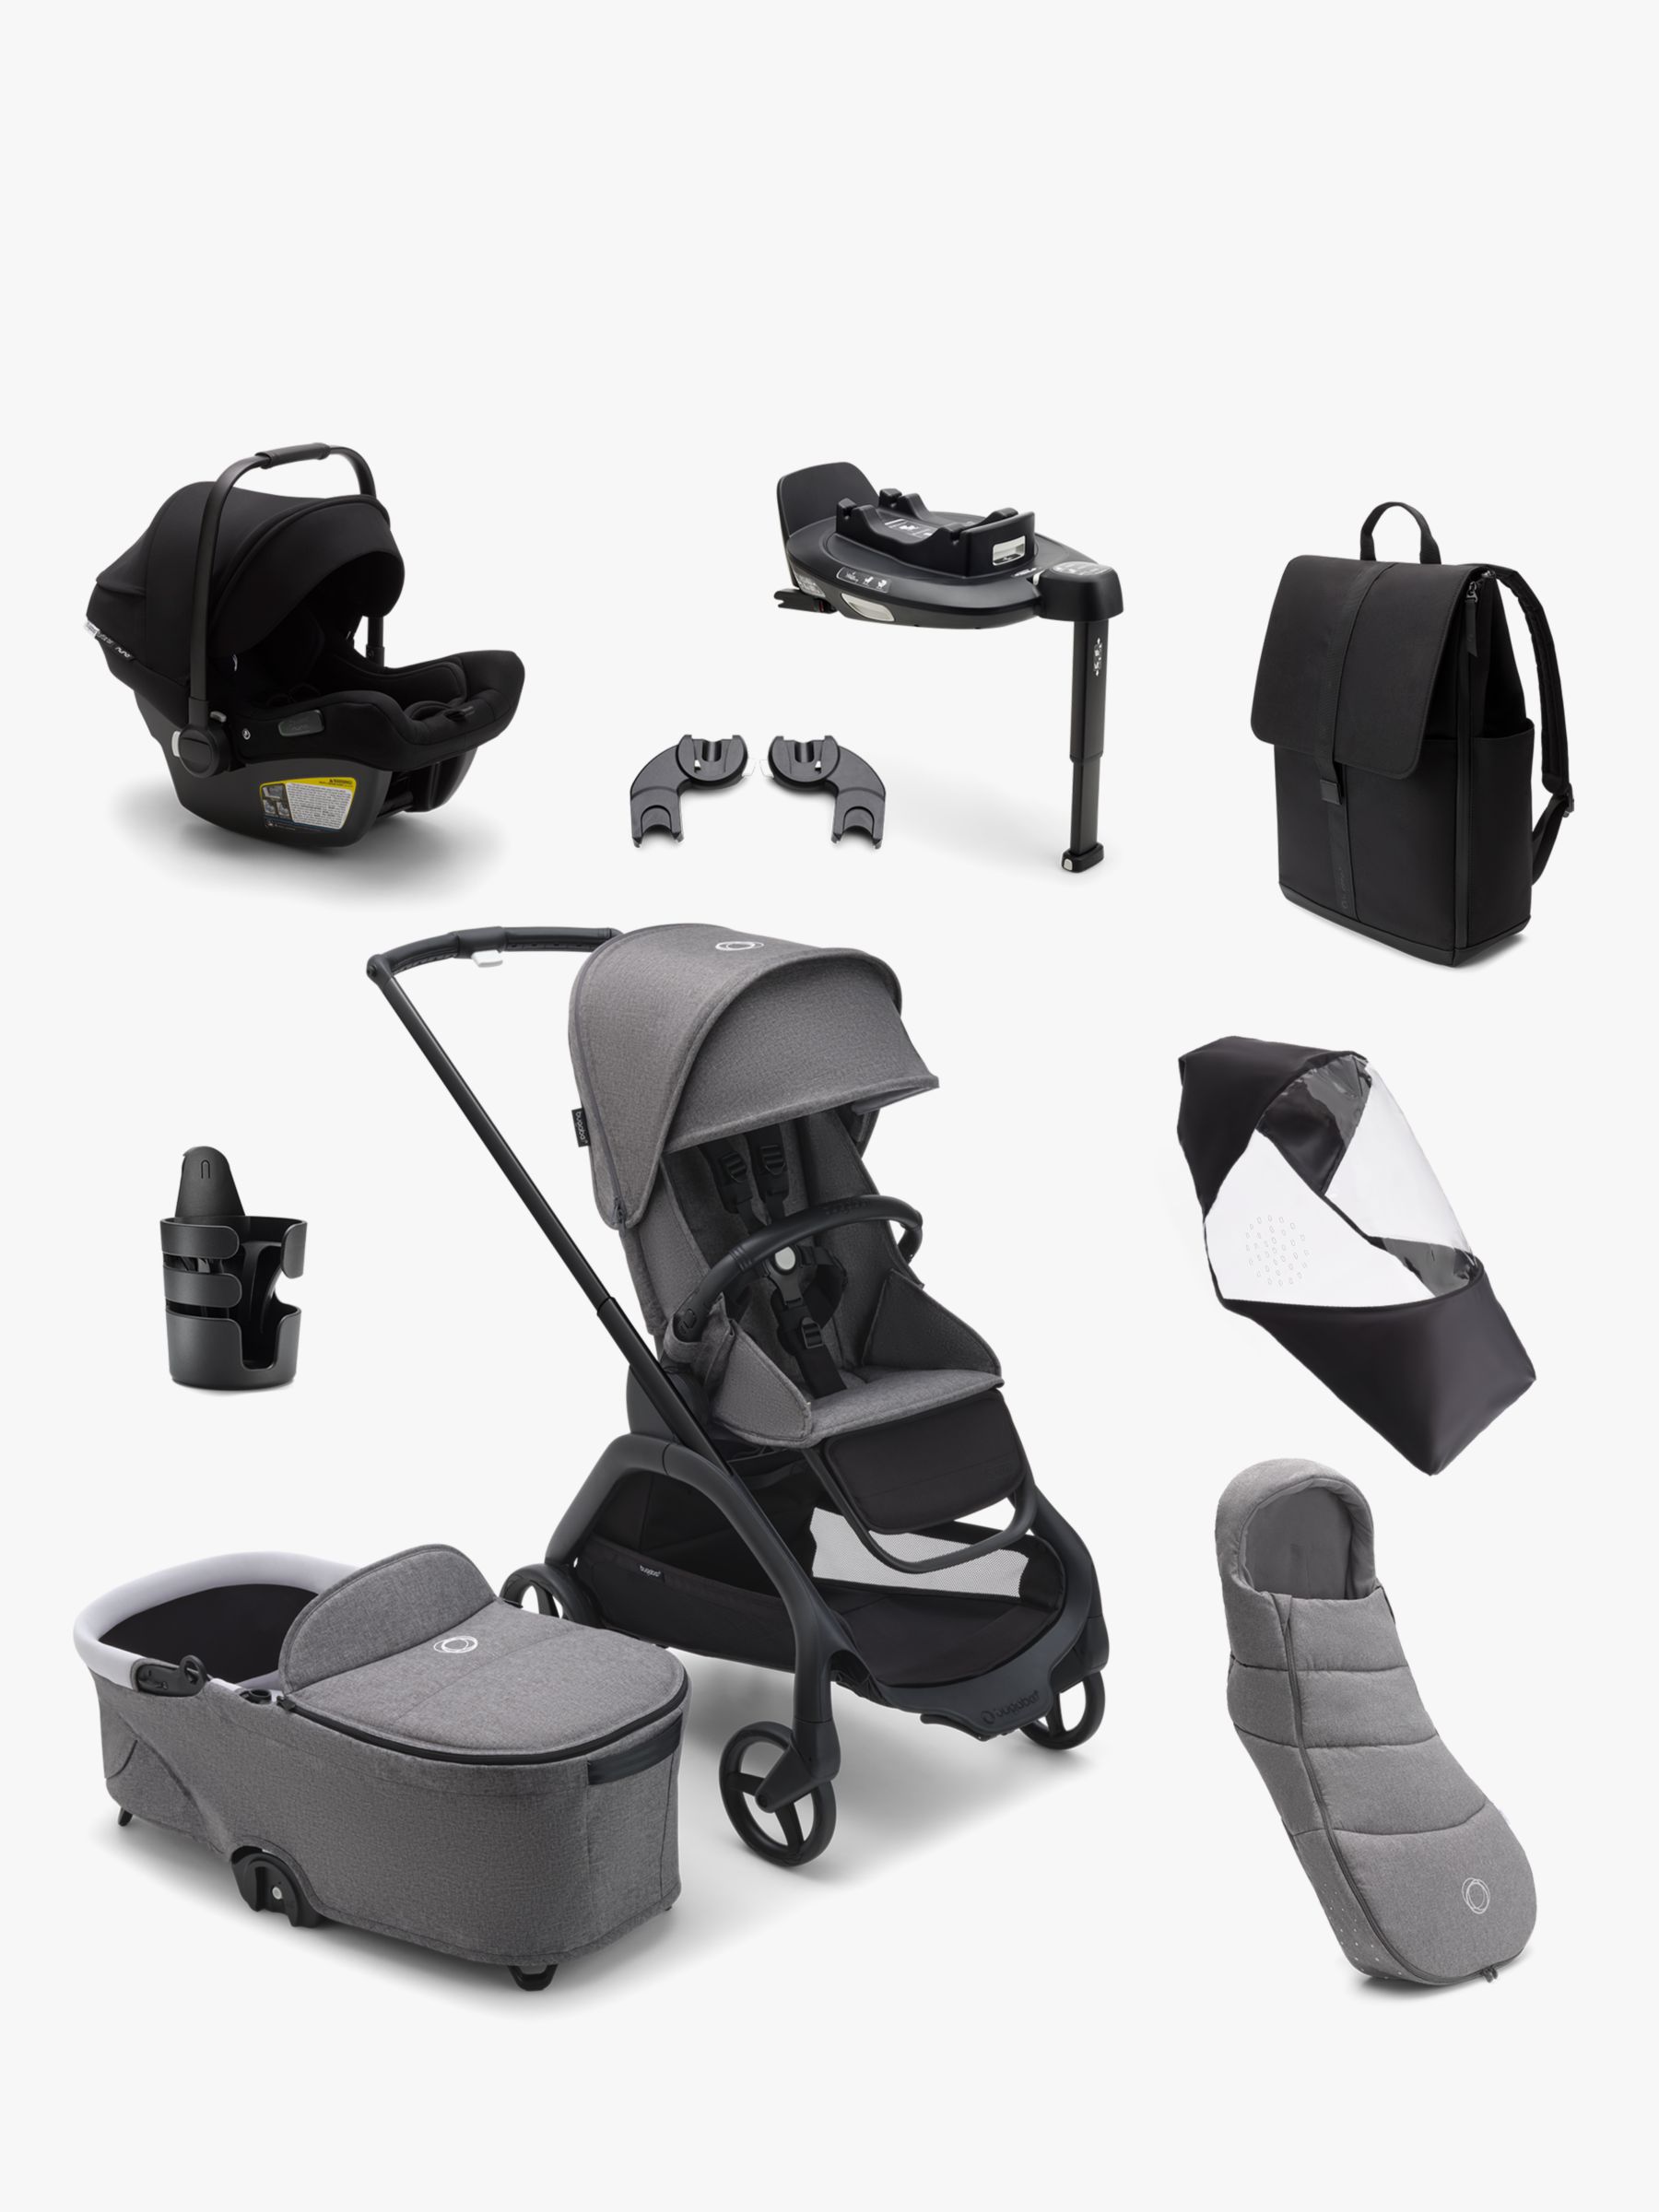 Indflydelsesrig Ruin Cyberplads Bugaboo Dragonfly Pushchair & Carrycot, Turtle Air by Nuna Car Seat with  Base & Accessories Ultimate Bundle, Grey Melange